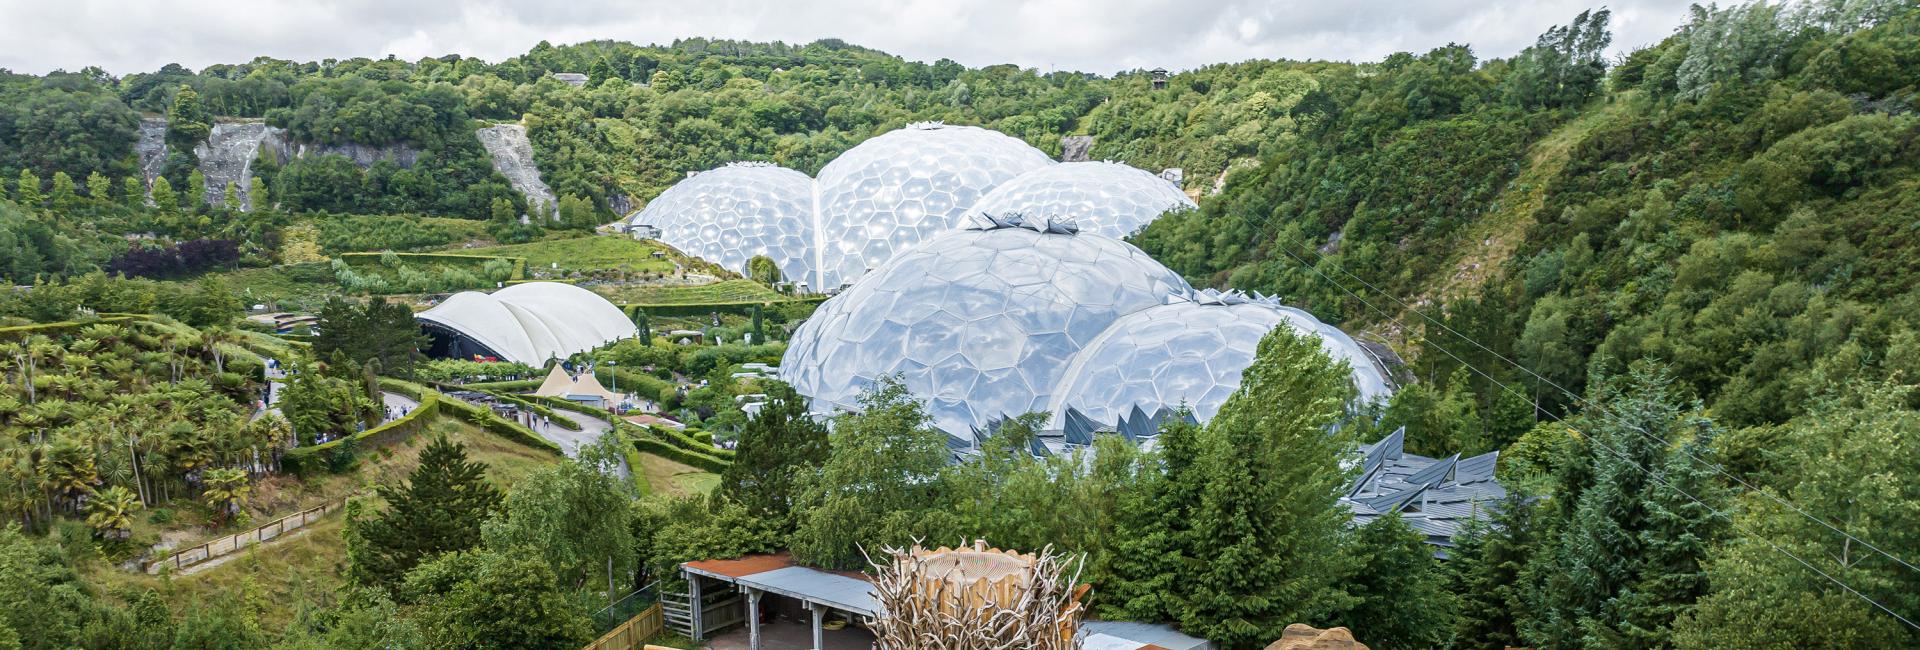 Eden Project Biomes and Nature's Playground